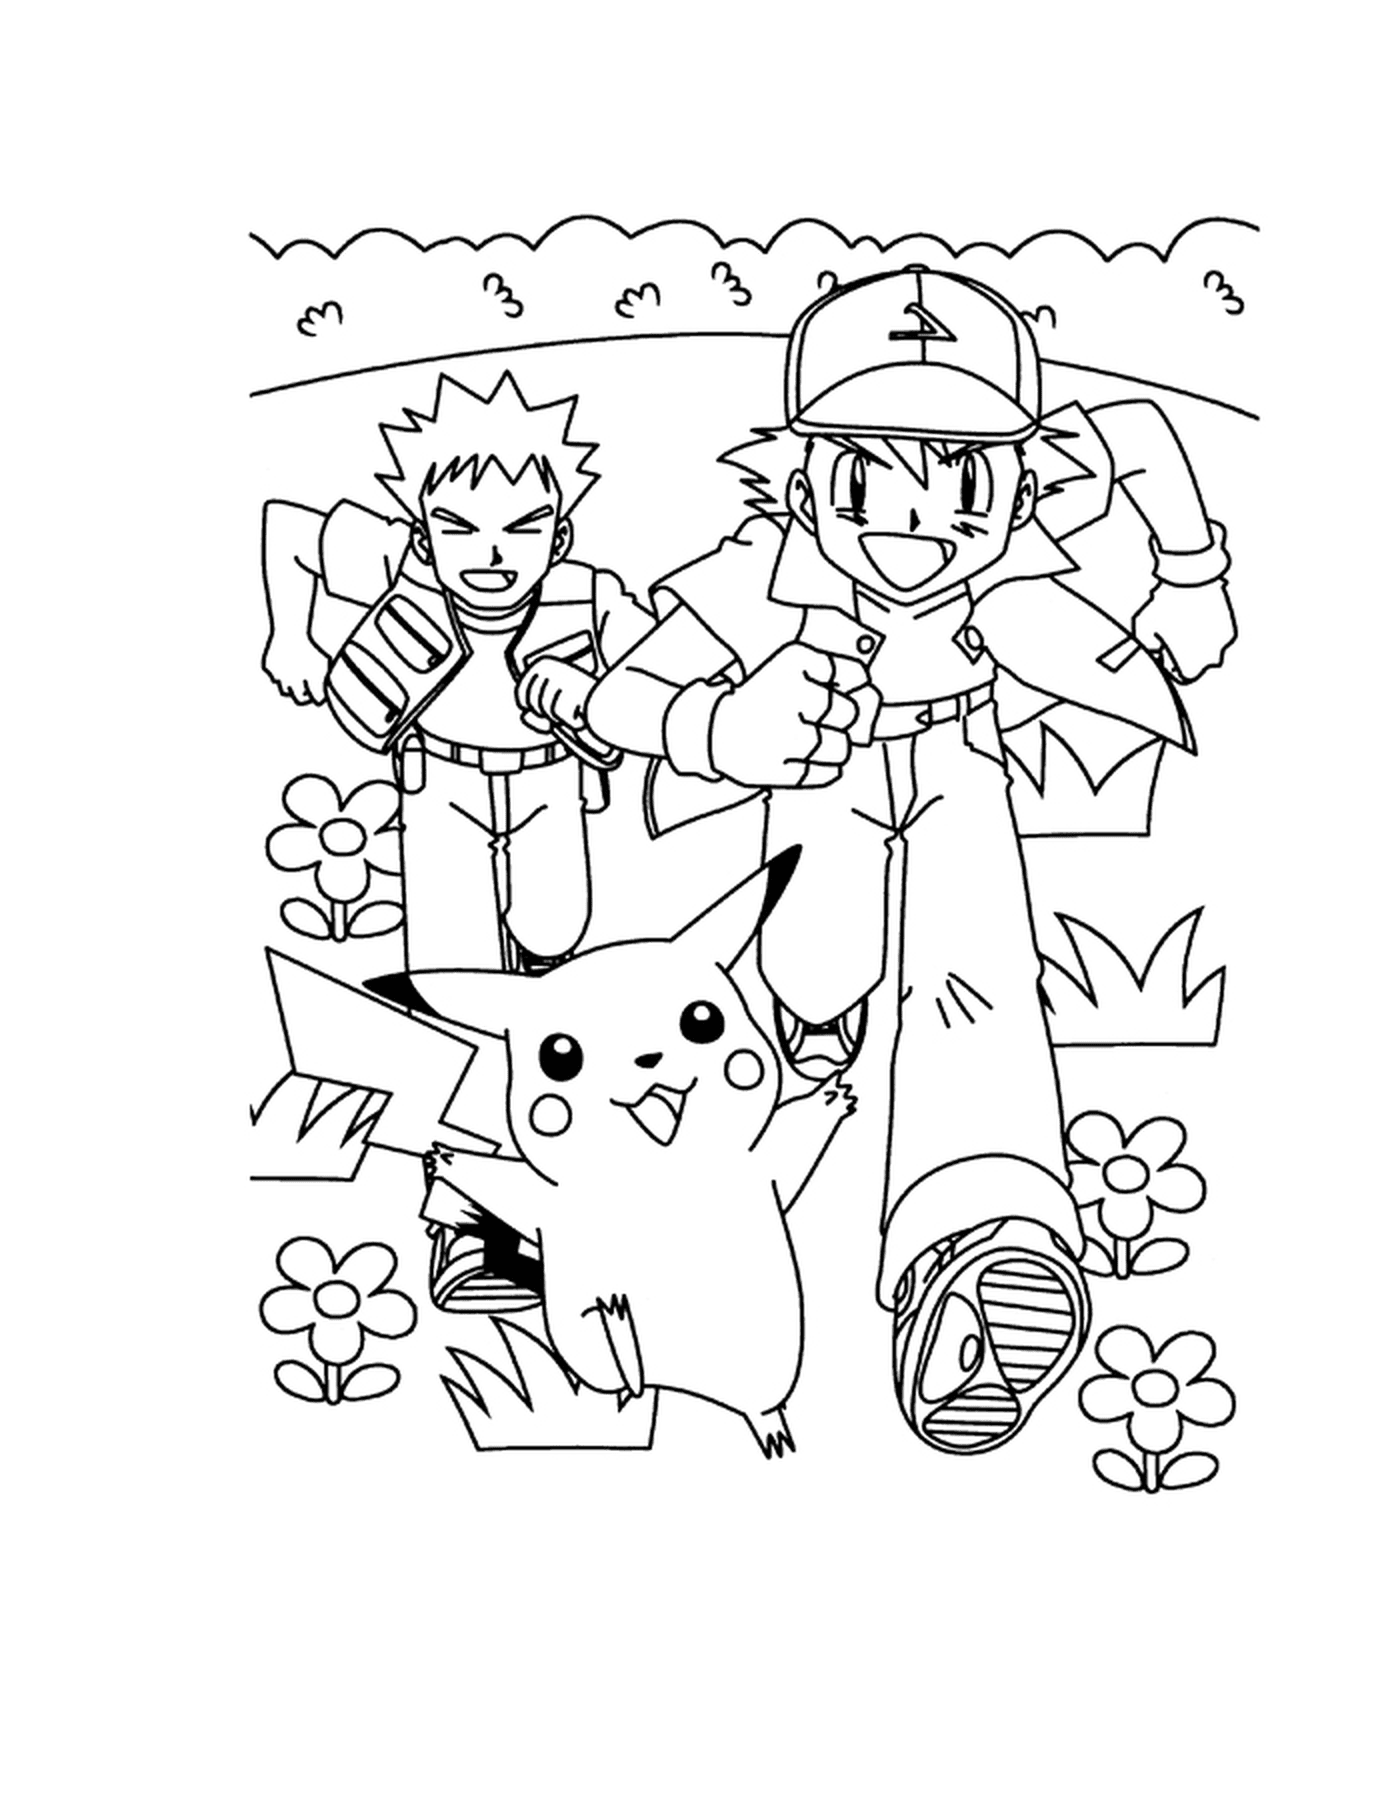  Two people and Pikachu together 